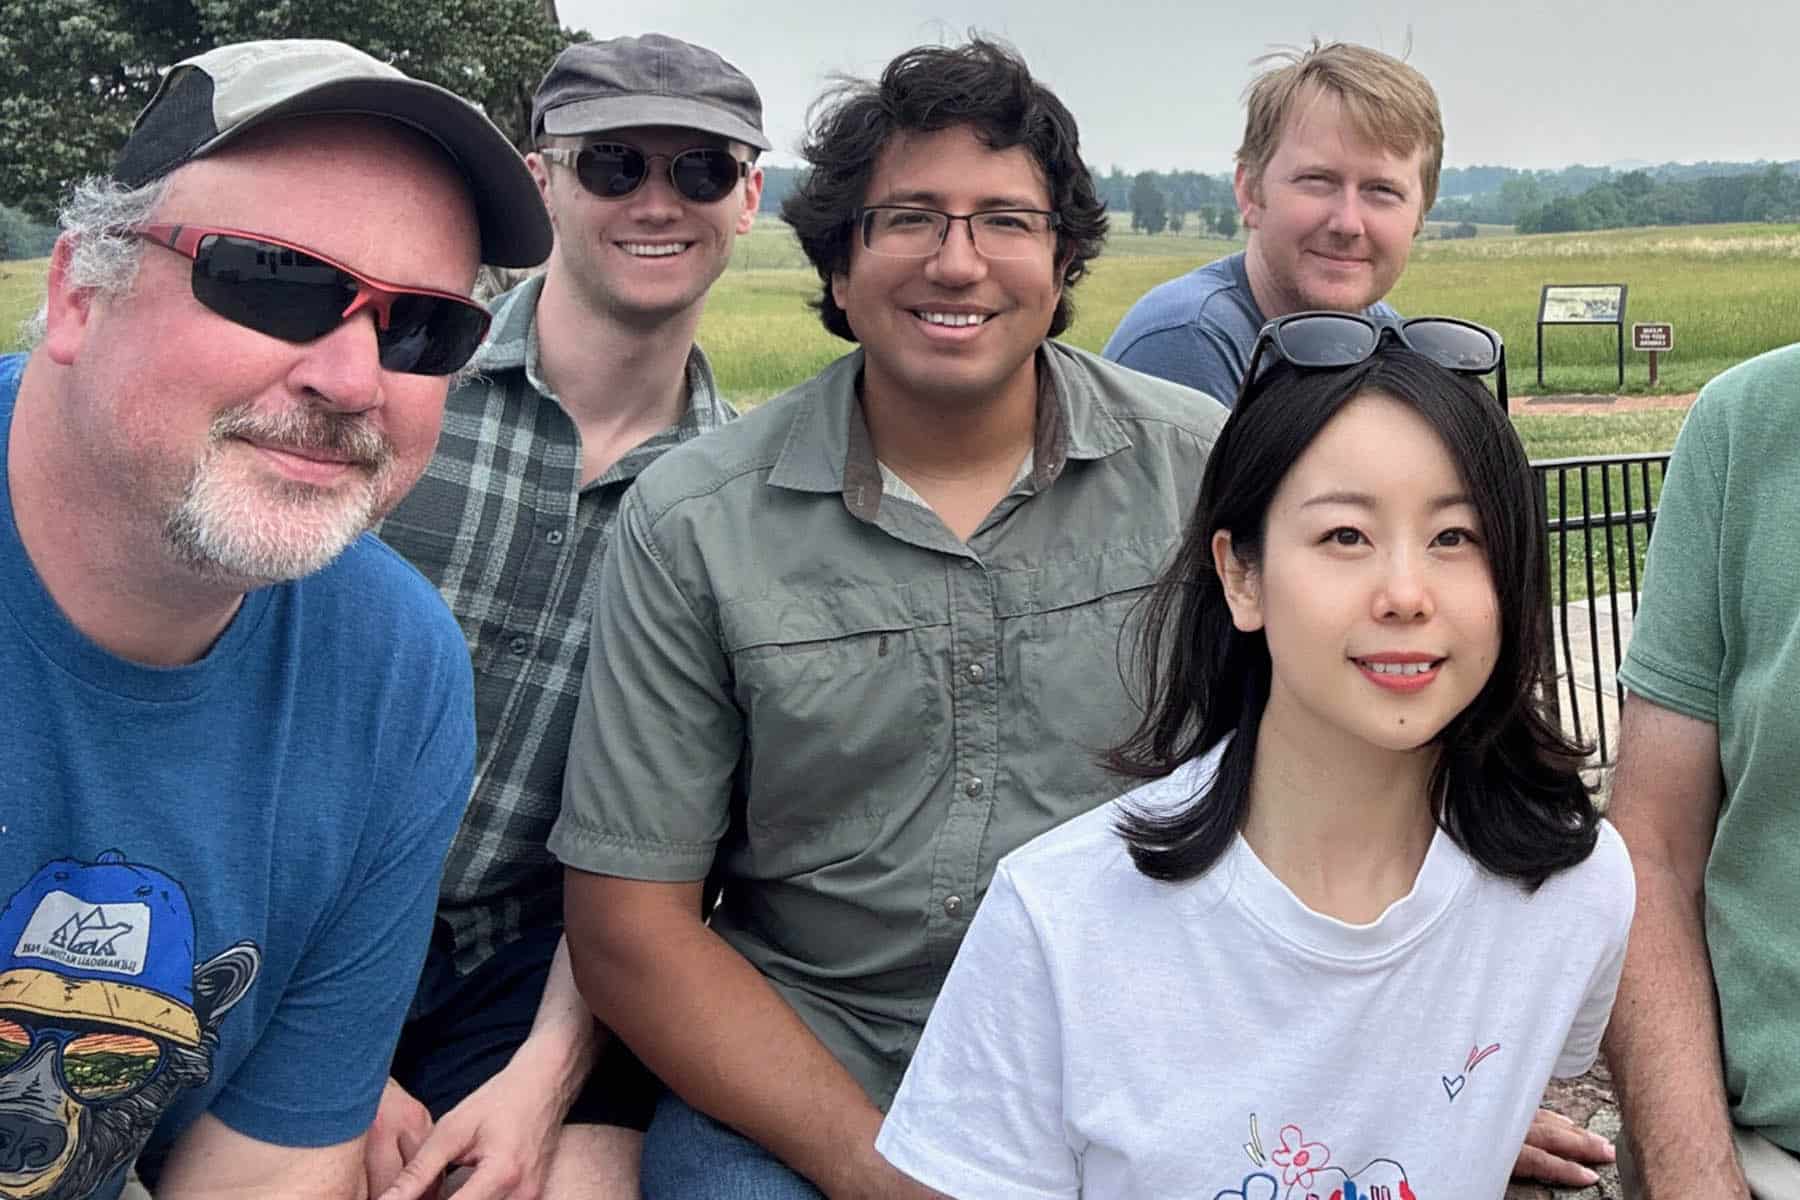 A group of six RAP colleagues visit Manassas National Battlefield Park in Virginia. They are smiling at the camera and wearing casual clothes. The park is behind them.